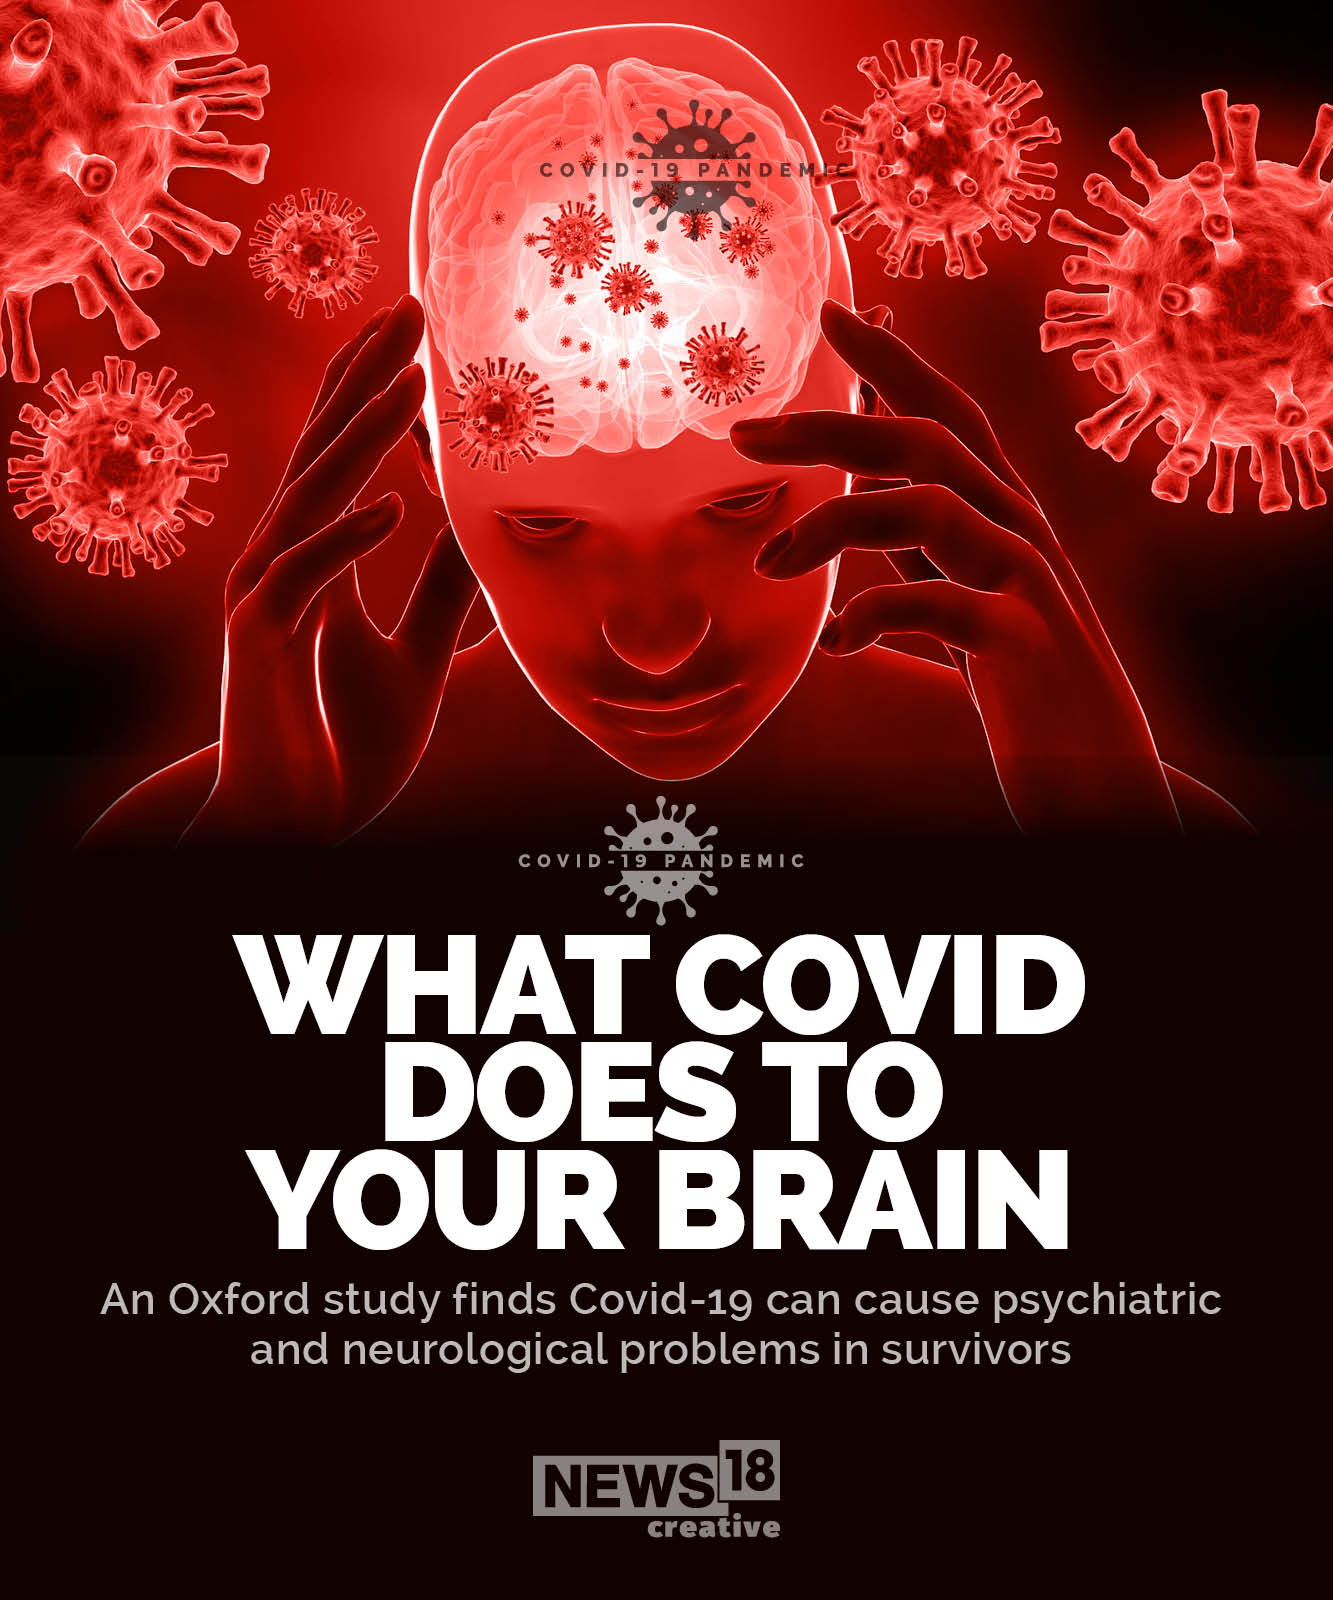 What Covid-19 does to your brain